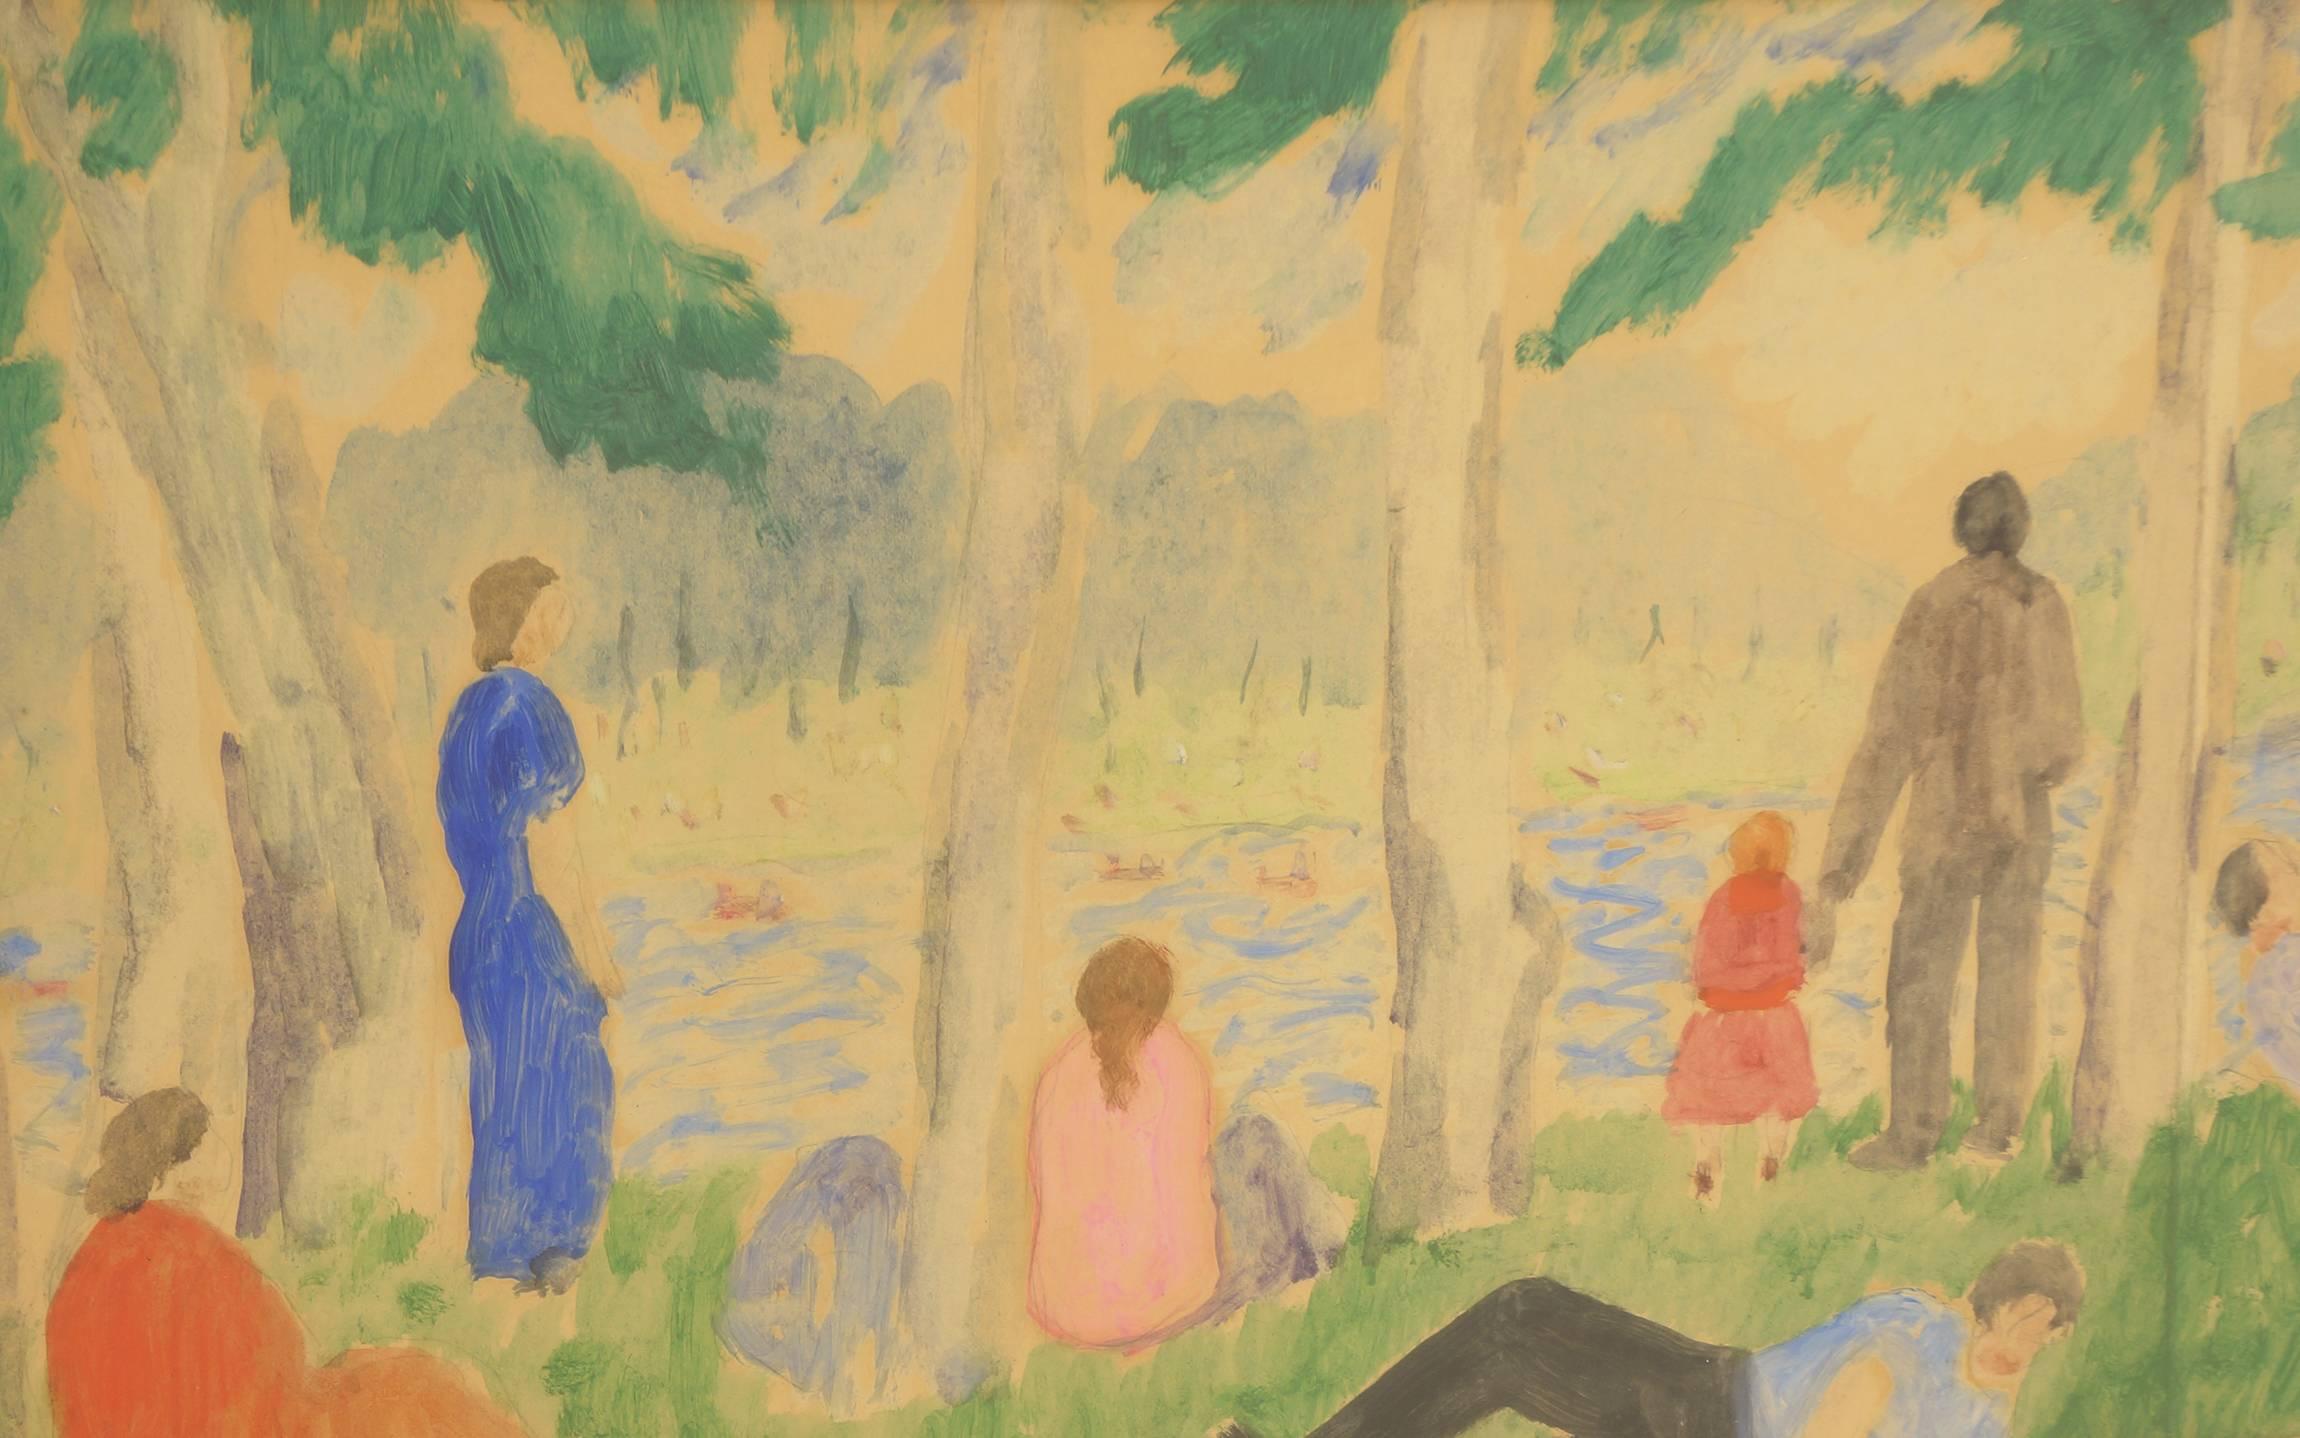 Early modernist watercolor on paper by Abraham Walkowitz (March 28, 1878-January 27, 1965), titled is Bathers on Grassy Shore. This work was done between 1920-1925. Framed.
 